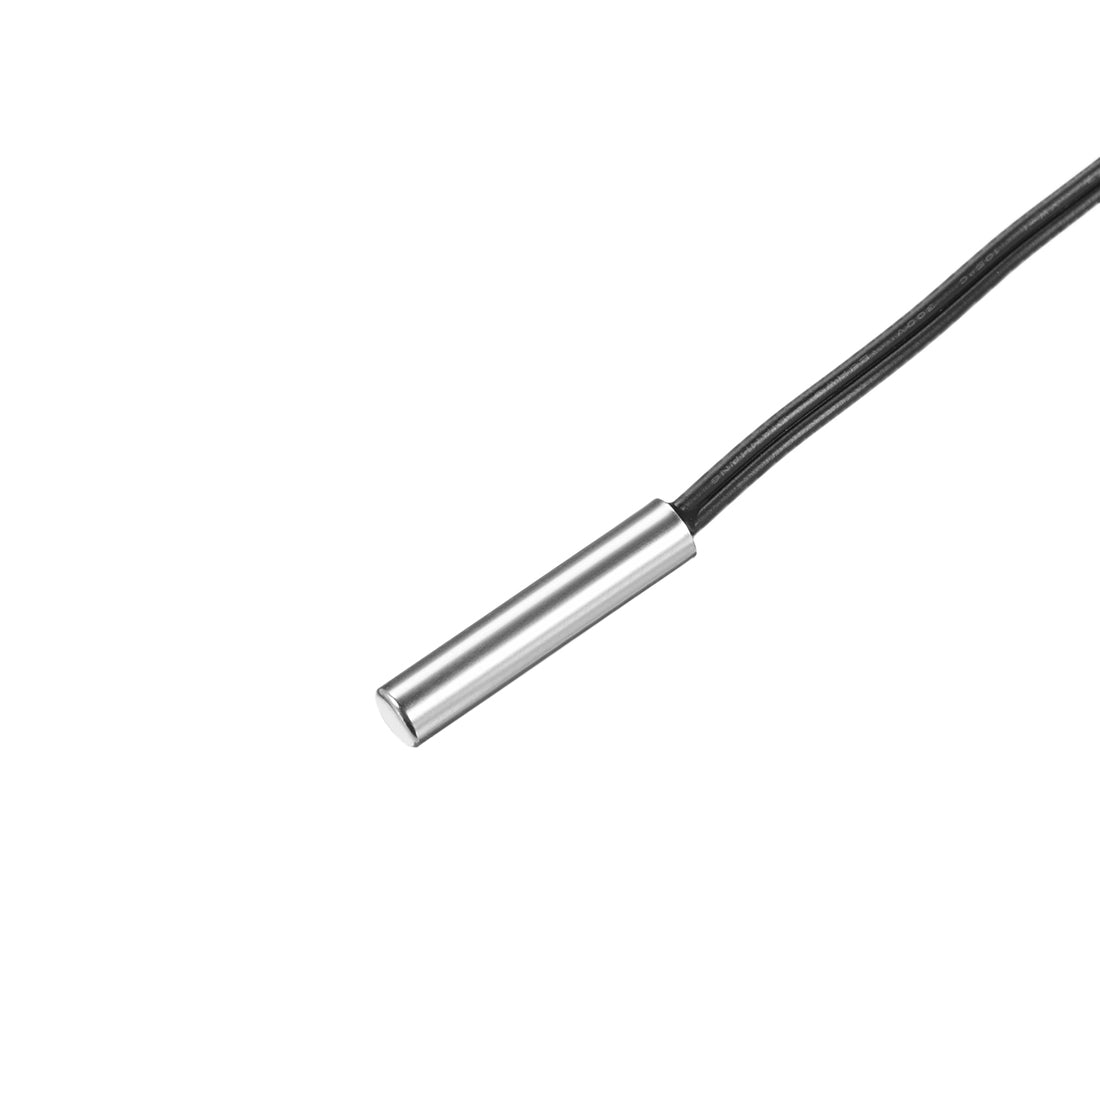 uxcell Uxcell 15K NTC Thermistor Probe 78.7 Inch Stainless Steel Sensitive Temperature Temp Sensor for Air Conditioner